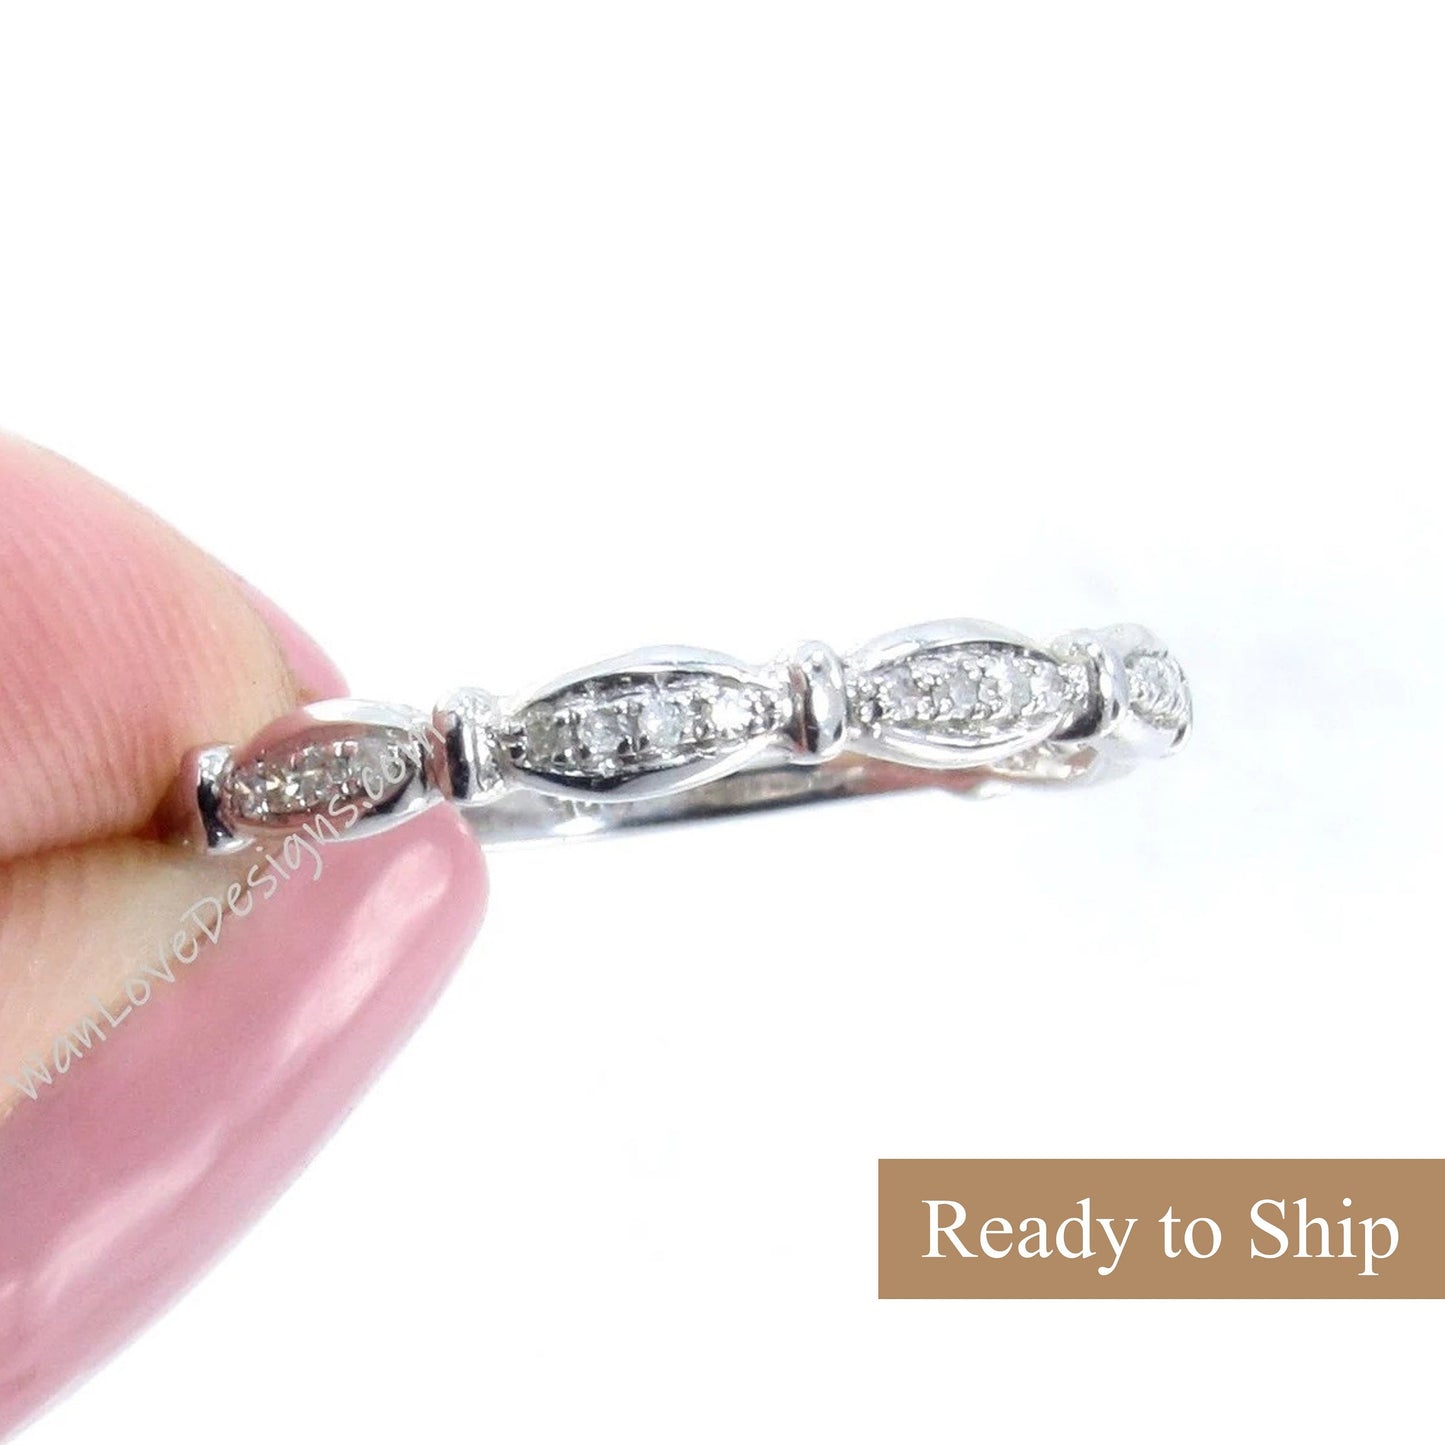 Sample Sale Ready to ship-Diamond Scalloped leaf Half Eternity Stackable Wedding Band Ring-Silver Rhodium-Engagement-Anniversary Gift-Pinky Wan Love Designs